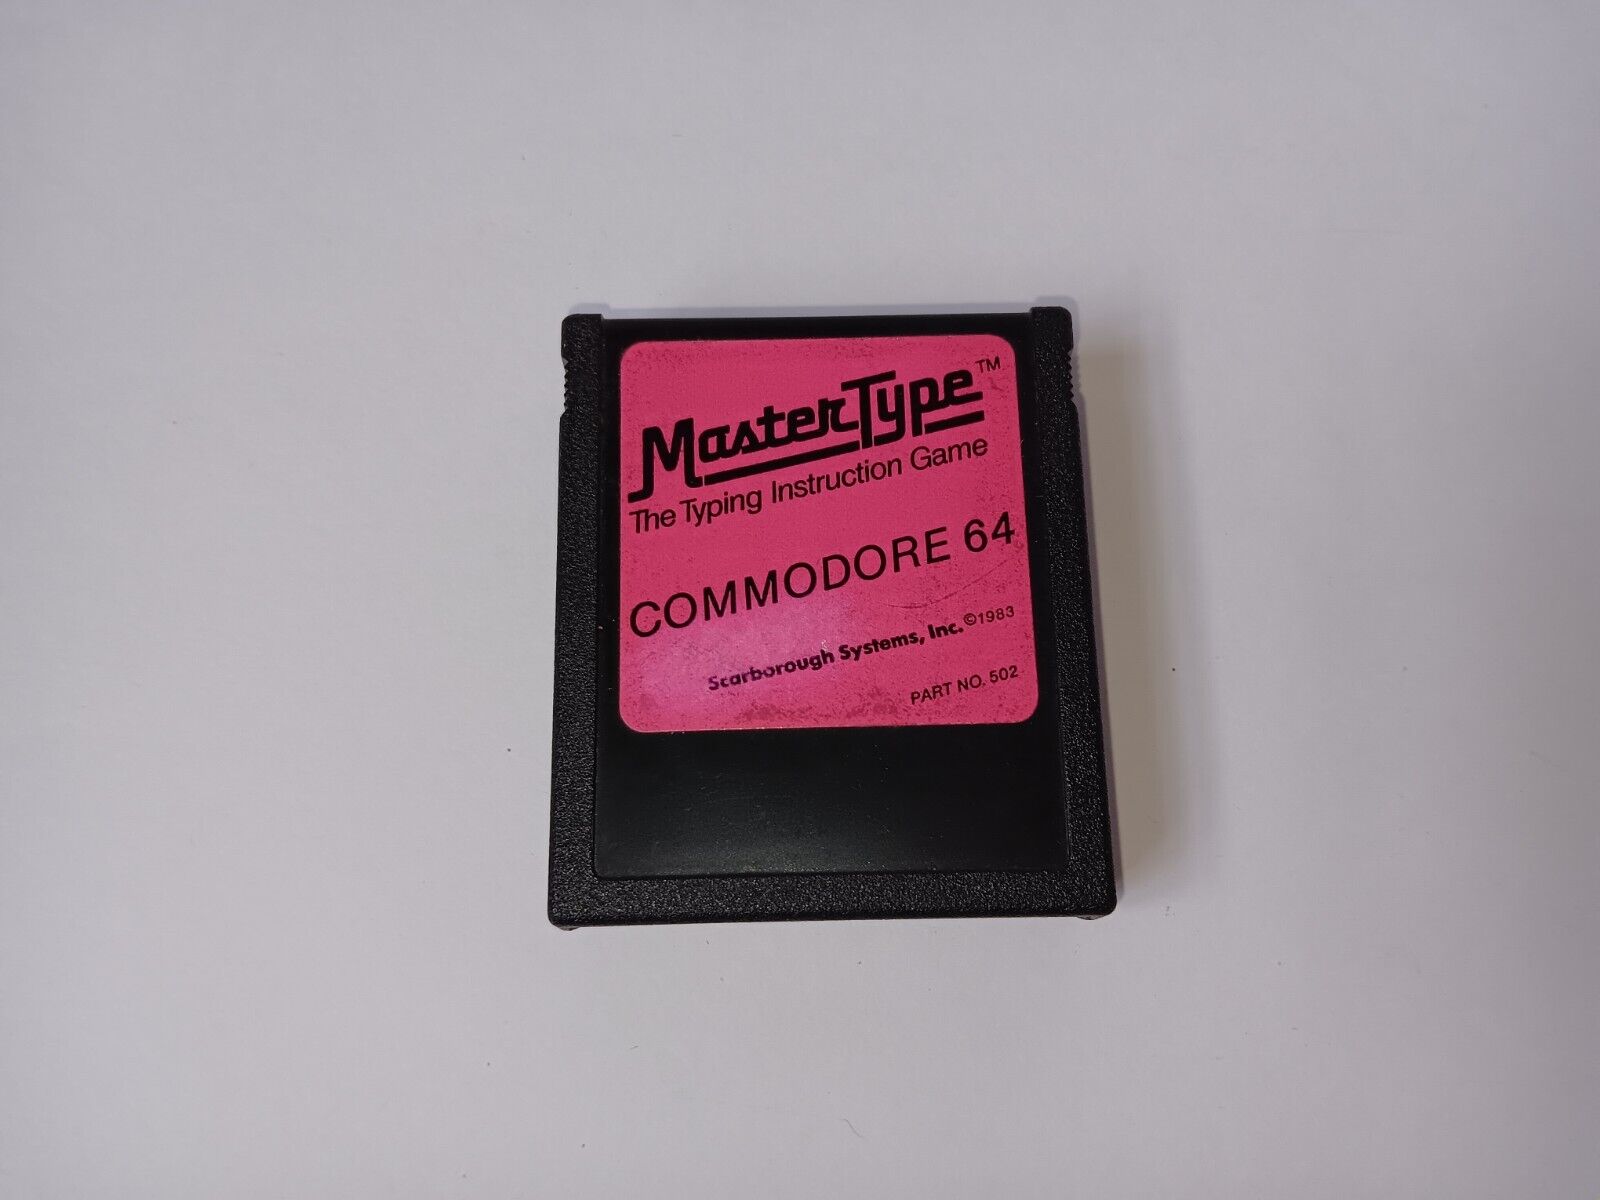 VTG Commodore 64 Master Type Instruction Computer Game Cartridge Tested/Works